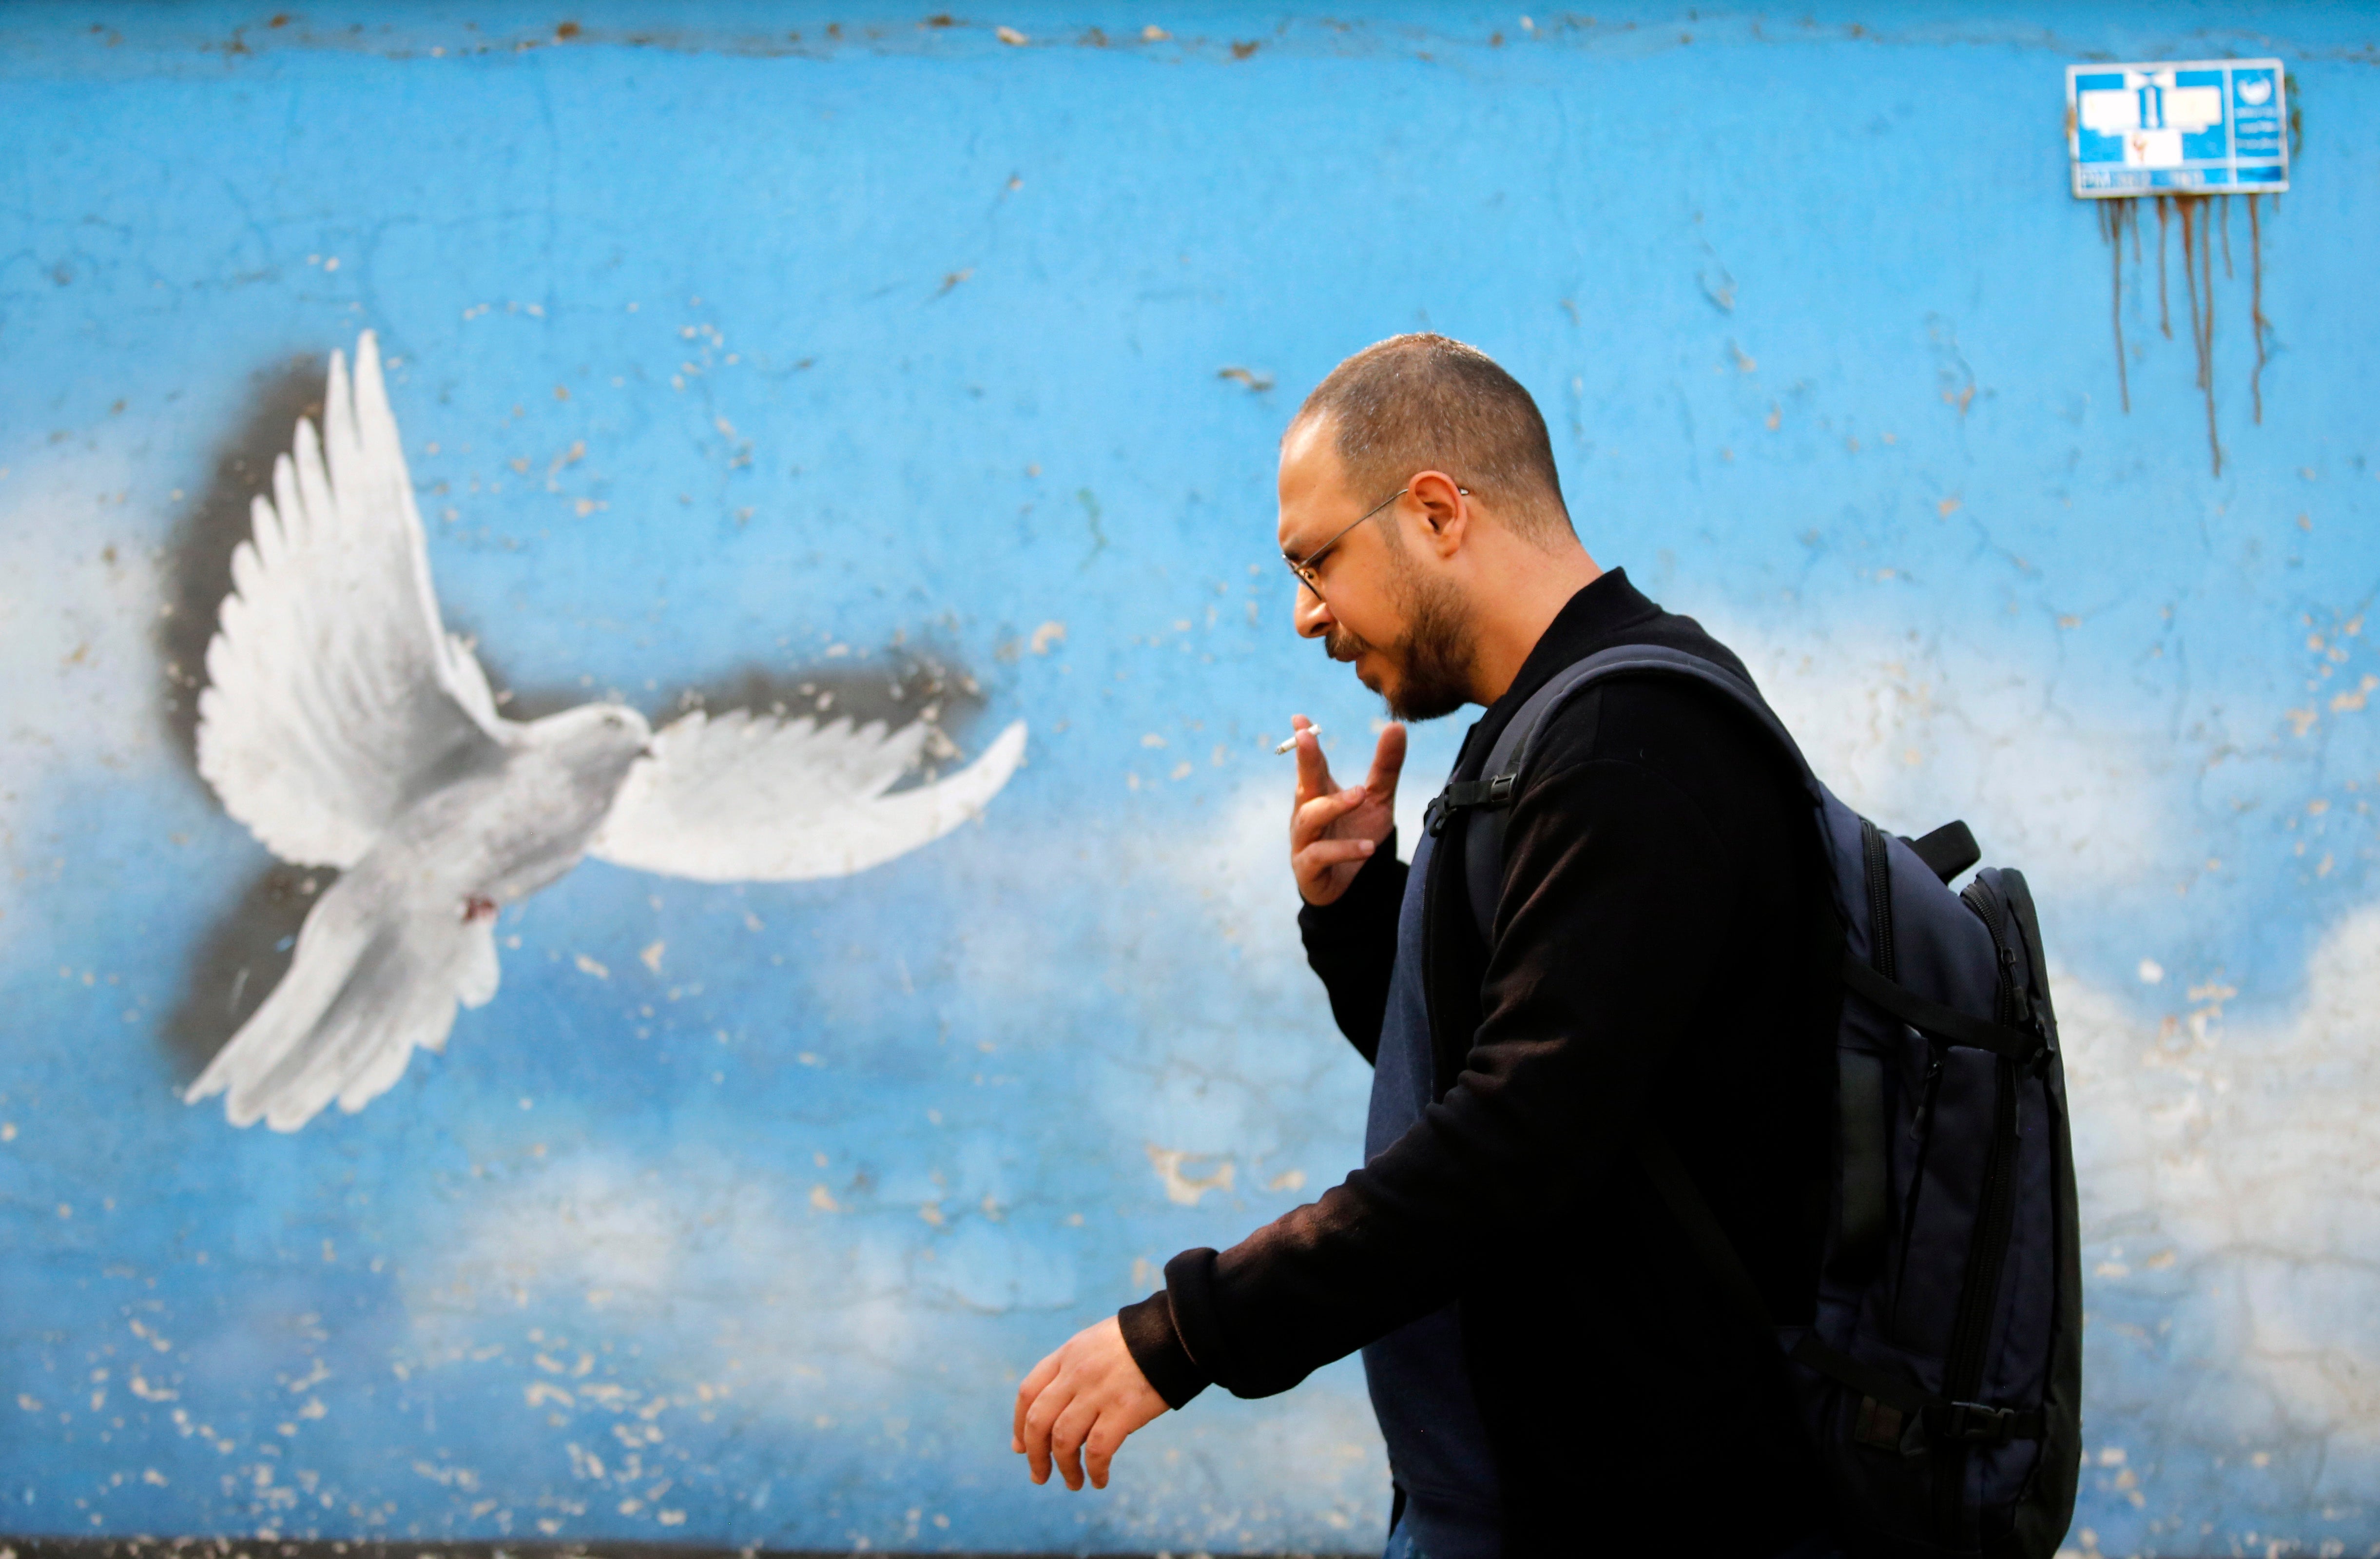 Led by hawks: an Iranian passes a mural of a dove in Tehran